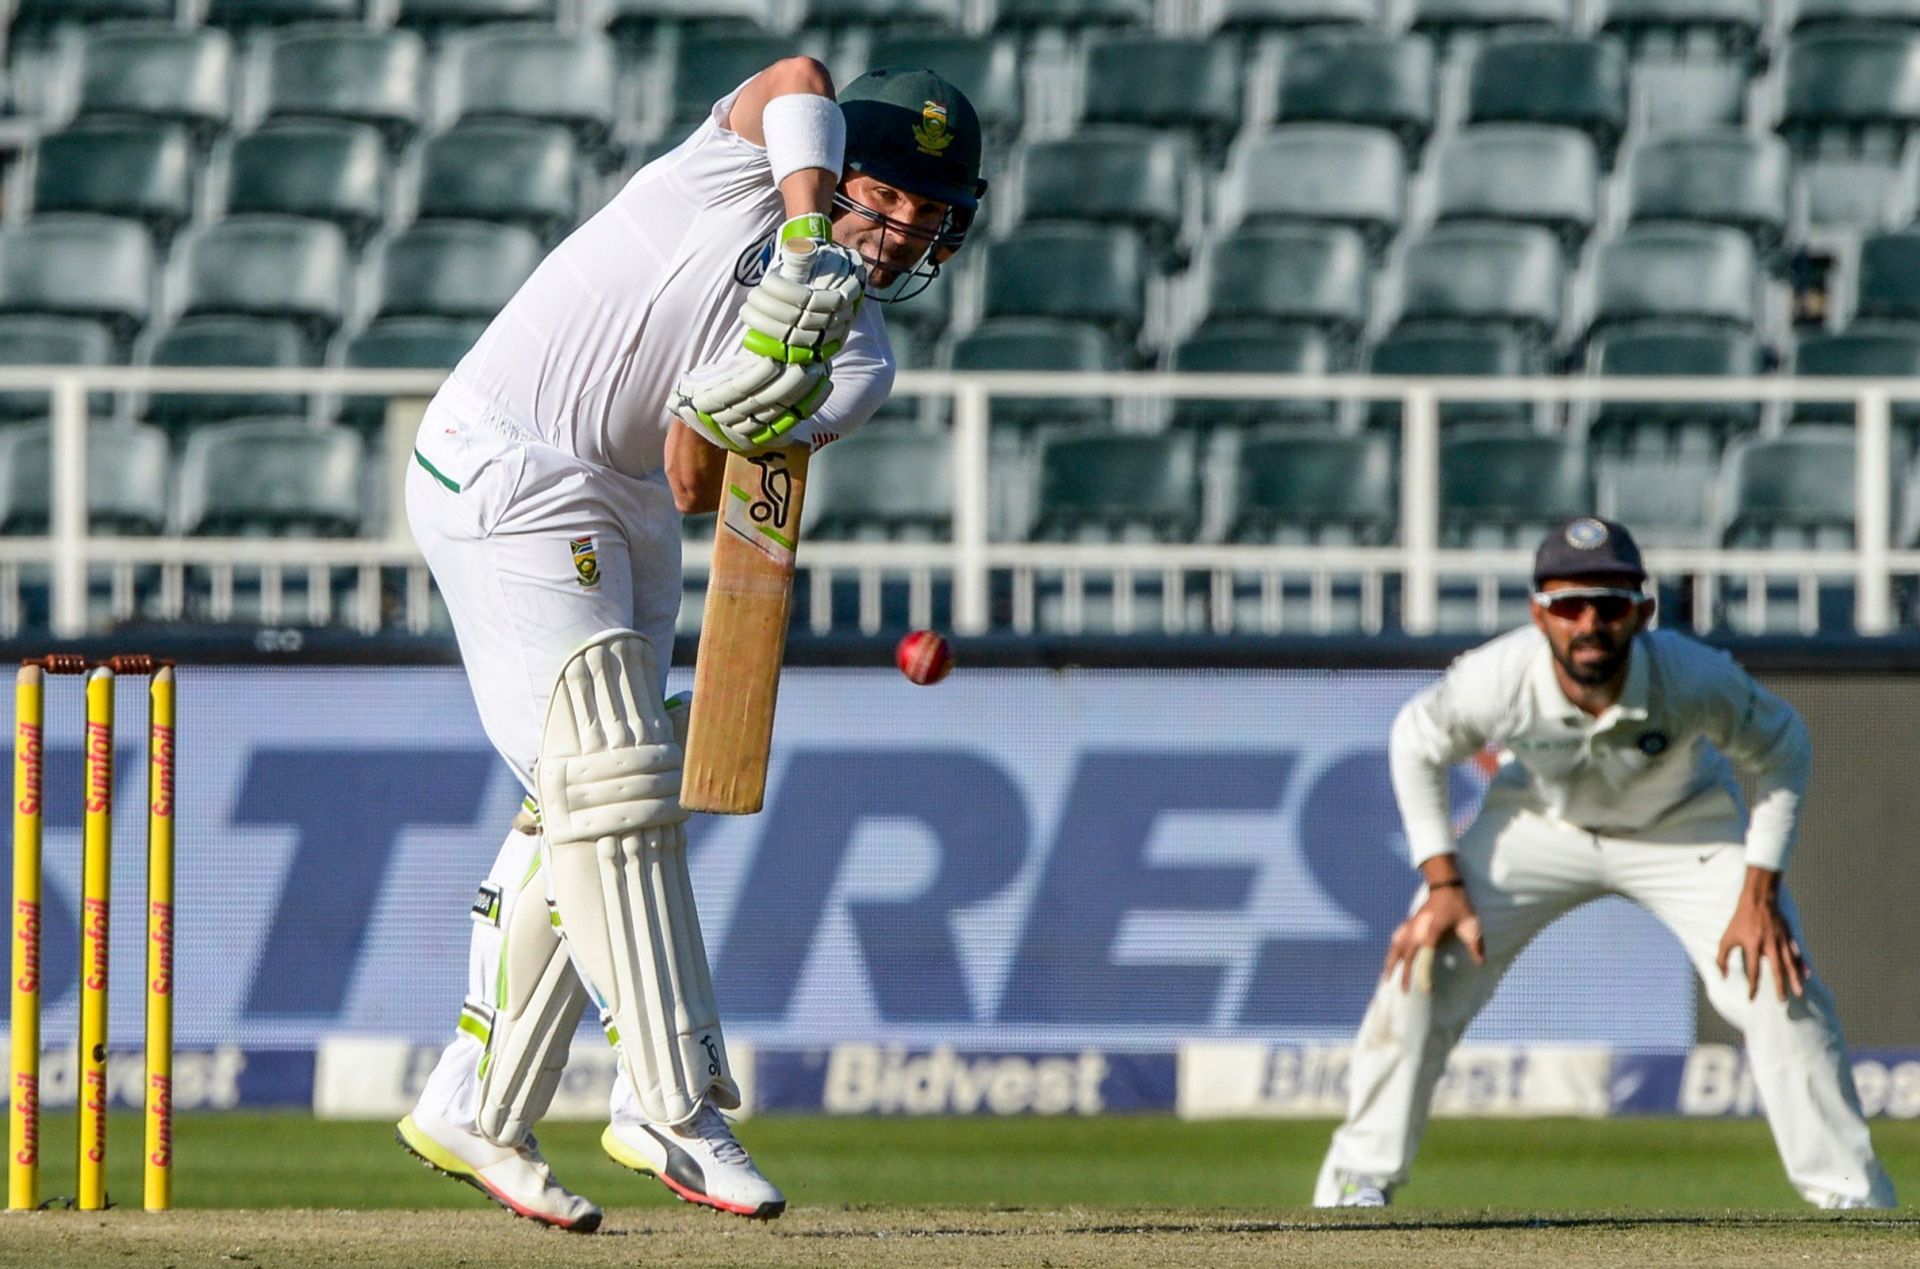 Dean Elgar batting during the 2018 series against India in South Africa